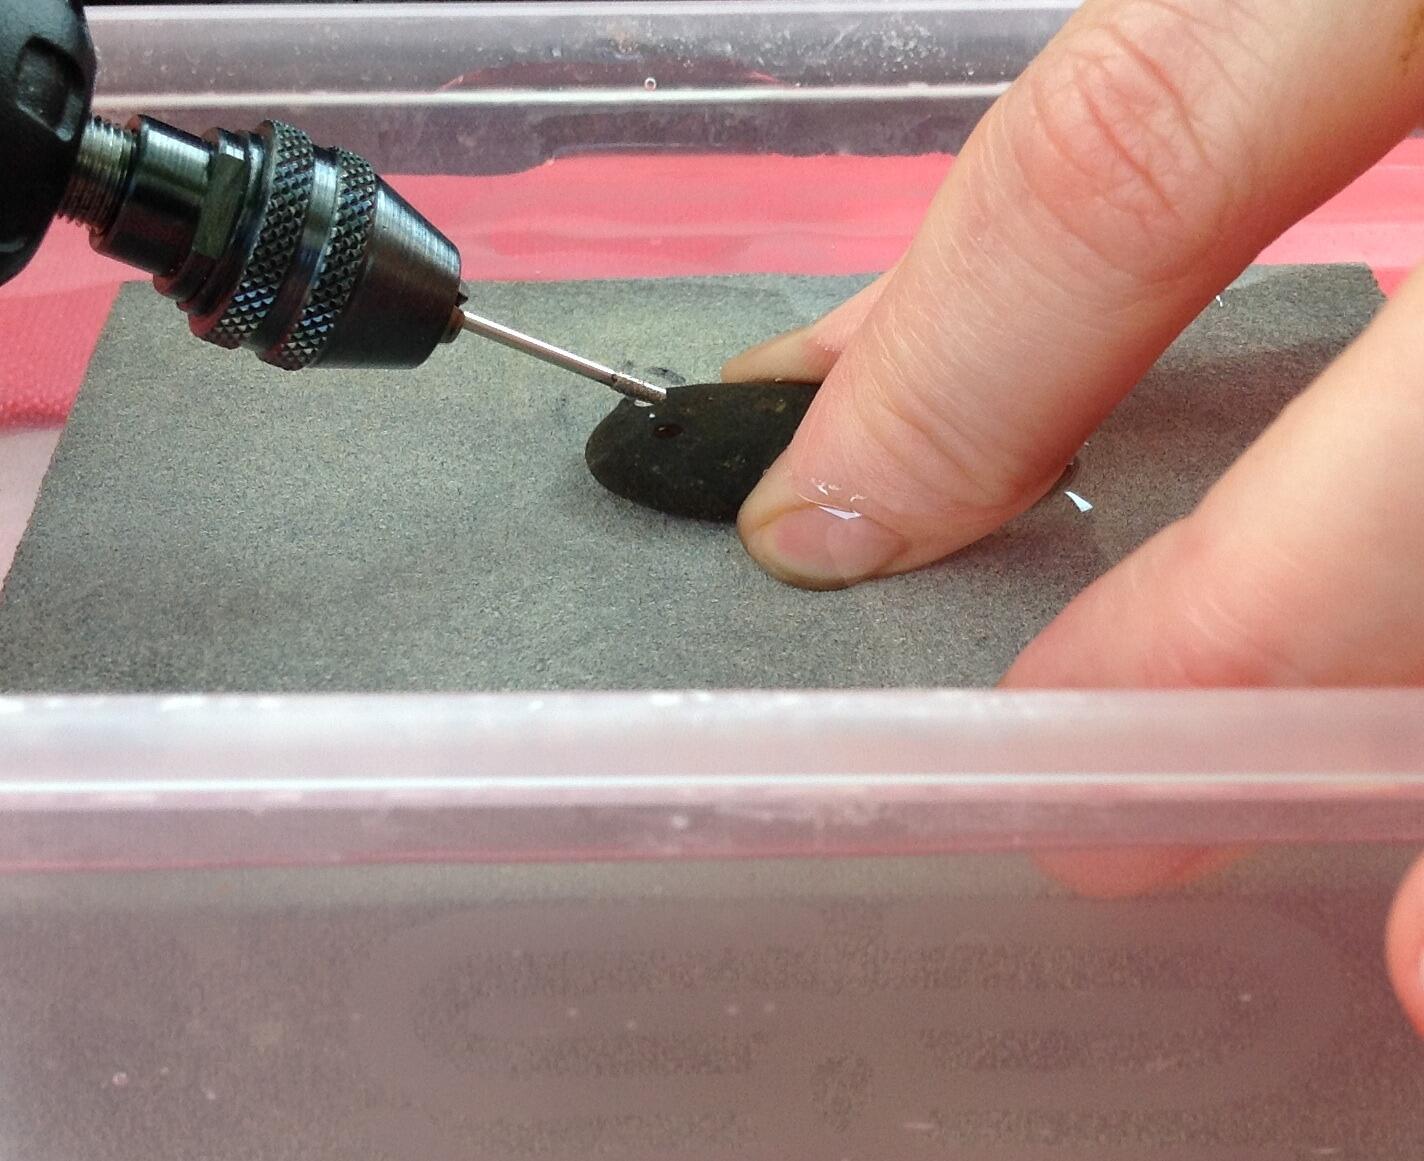 How to drill a Pebble using diamond tip drill bits